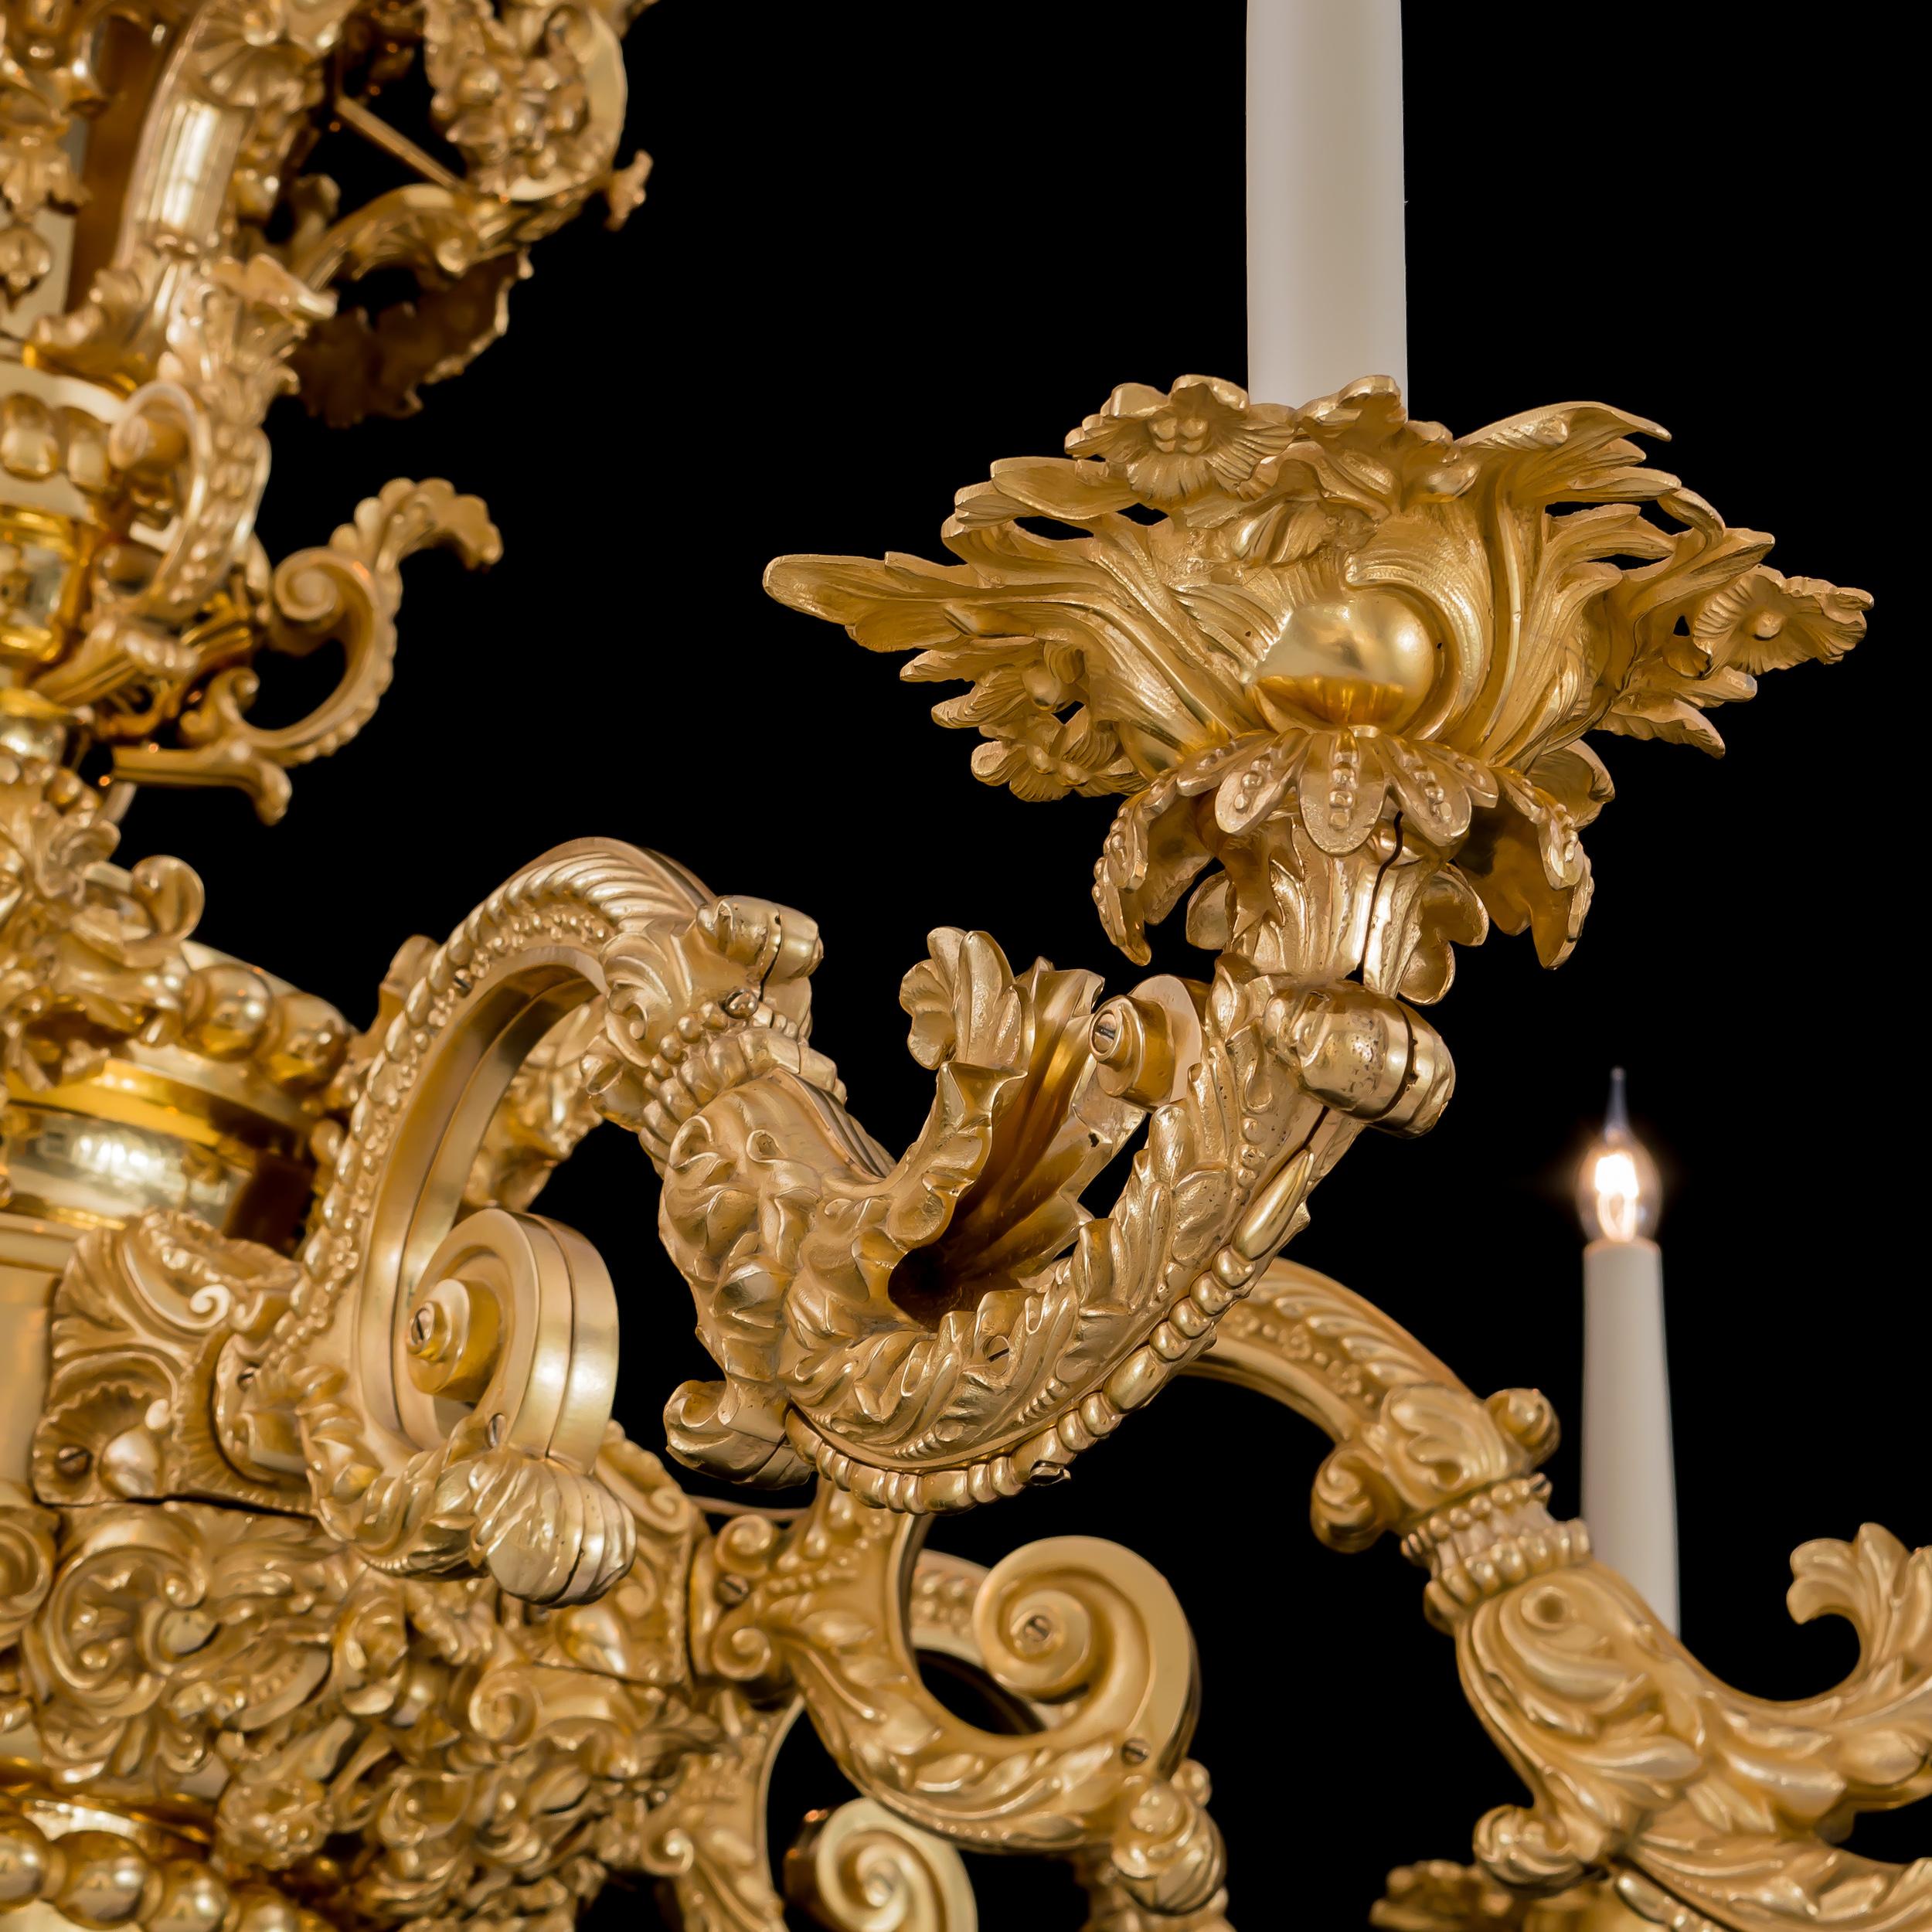 Magnificent George IV Period Ormolu Chandelier by Messenger & Phipson In Excellent Condition For Sale In London, GB